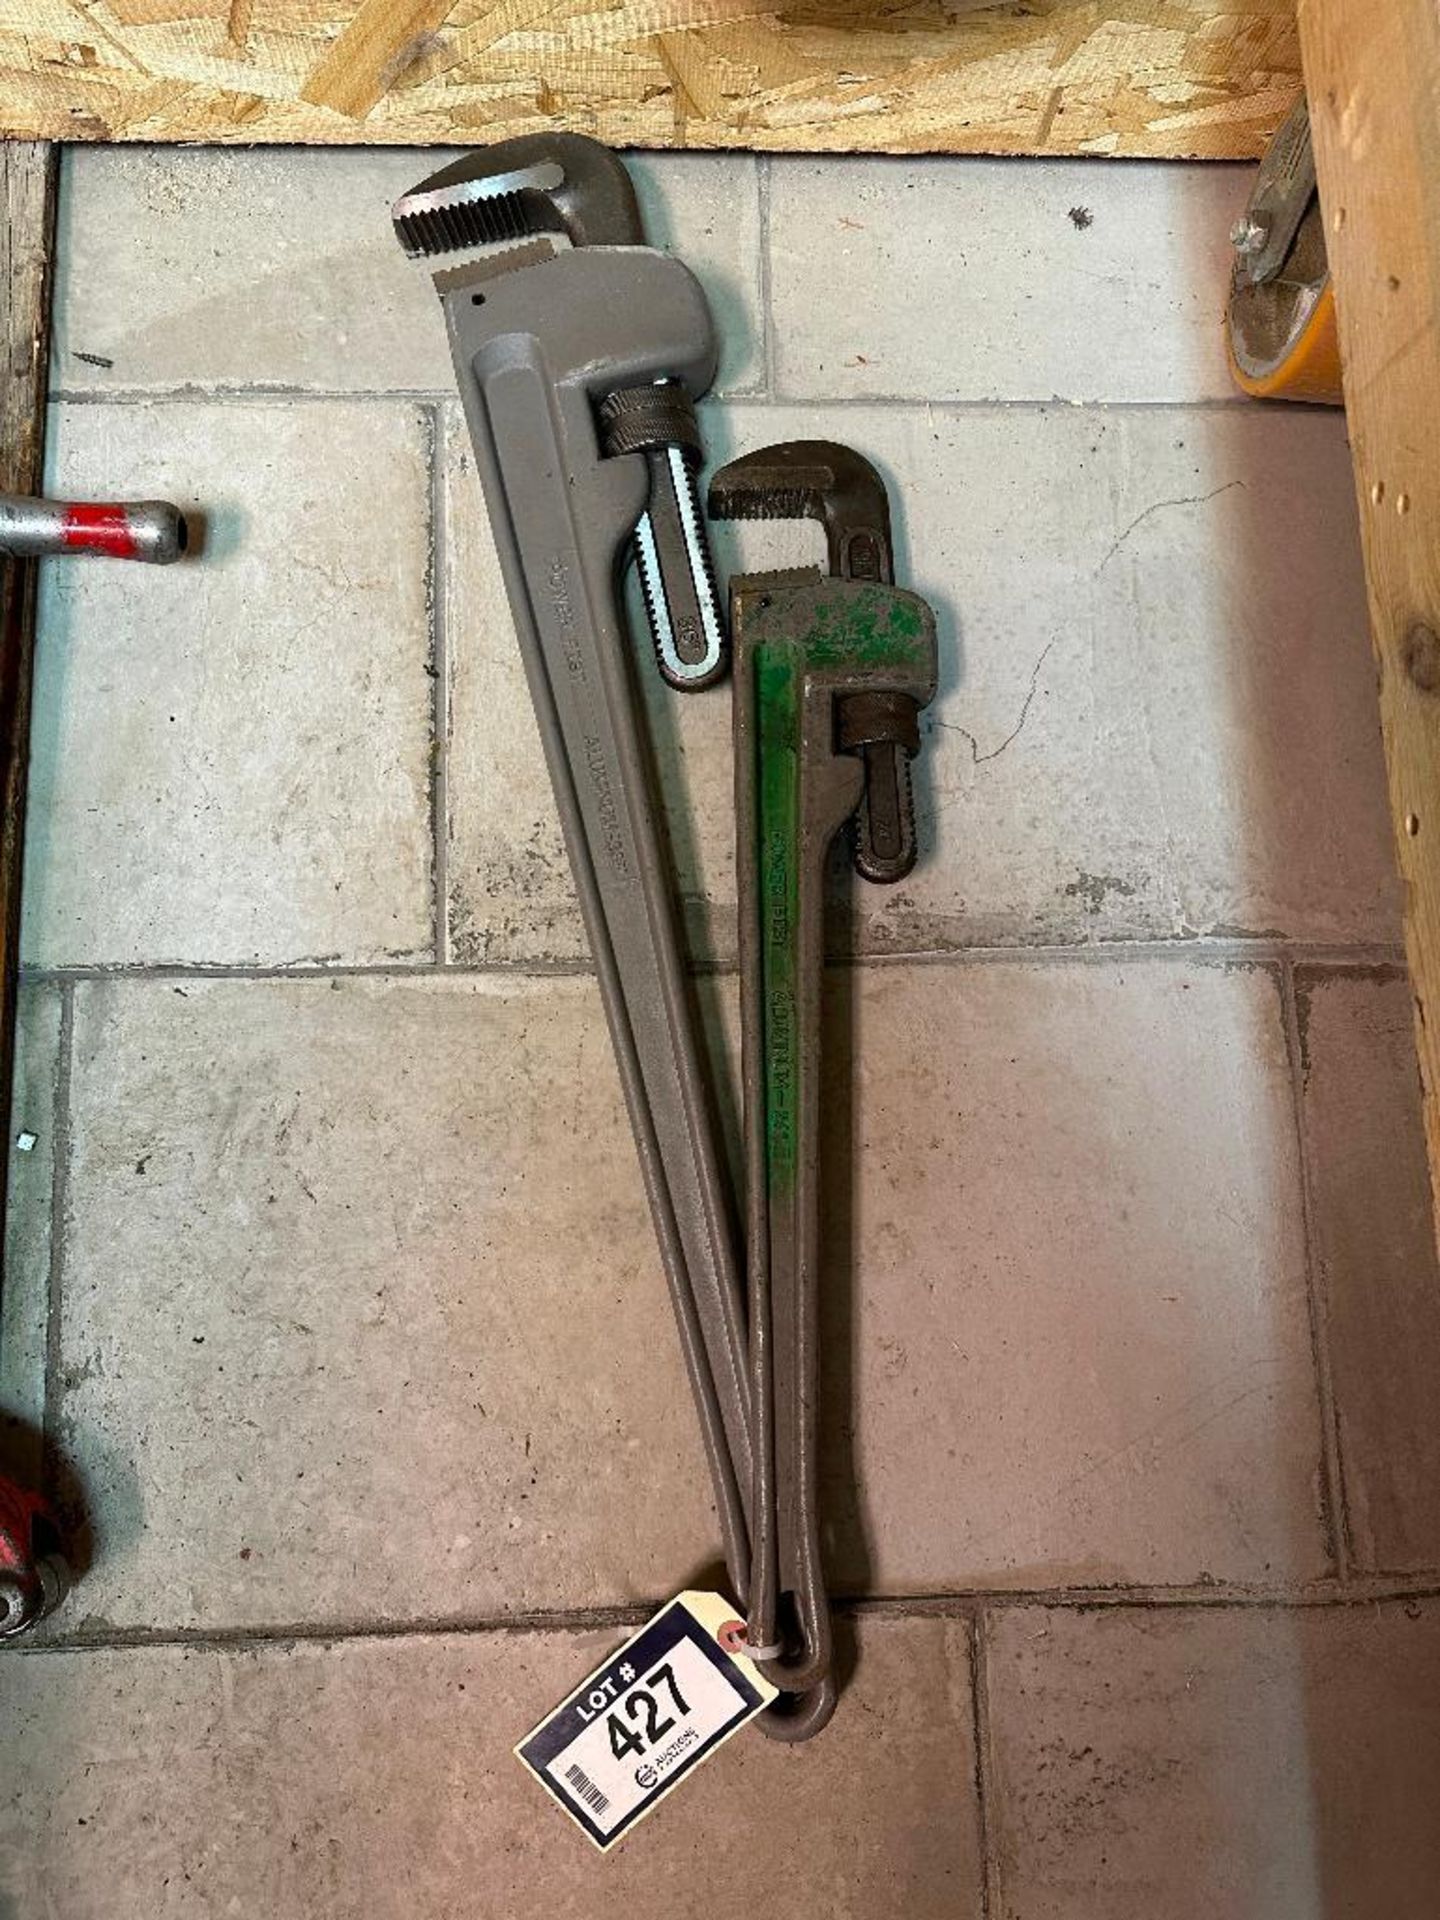 Lot of (1) Powerfist 36" Aluminum Pipe Wrench and (1) Powerfist 24" Aluminum Pipe Wrench - Image 2 of 3